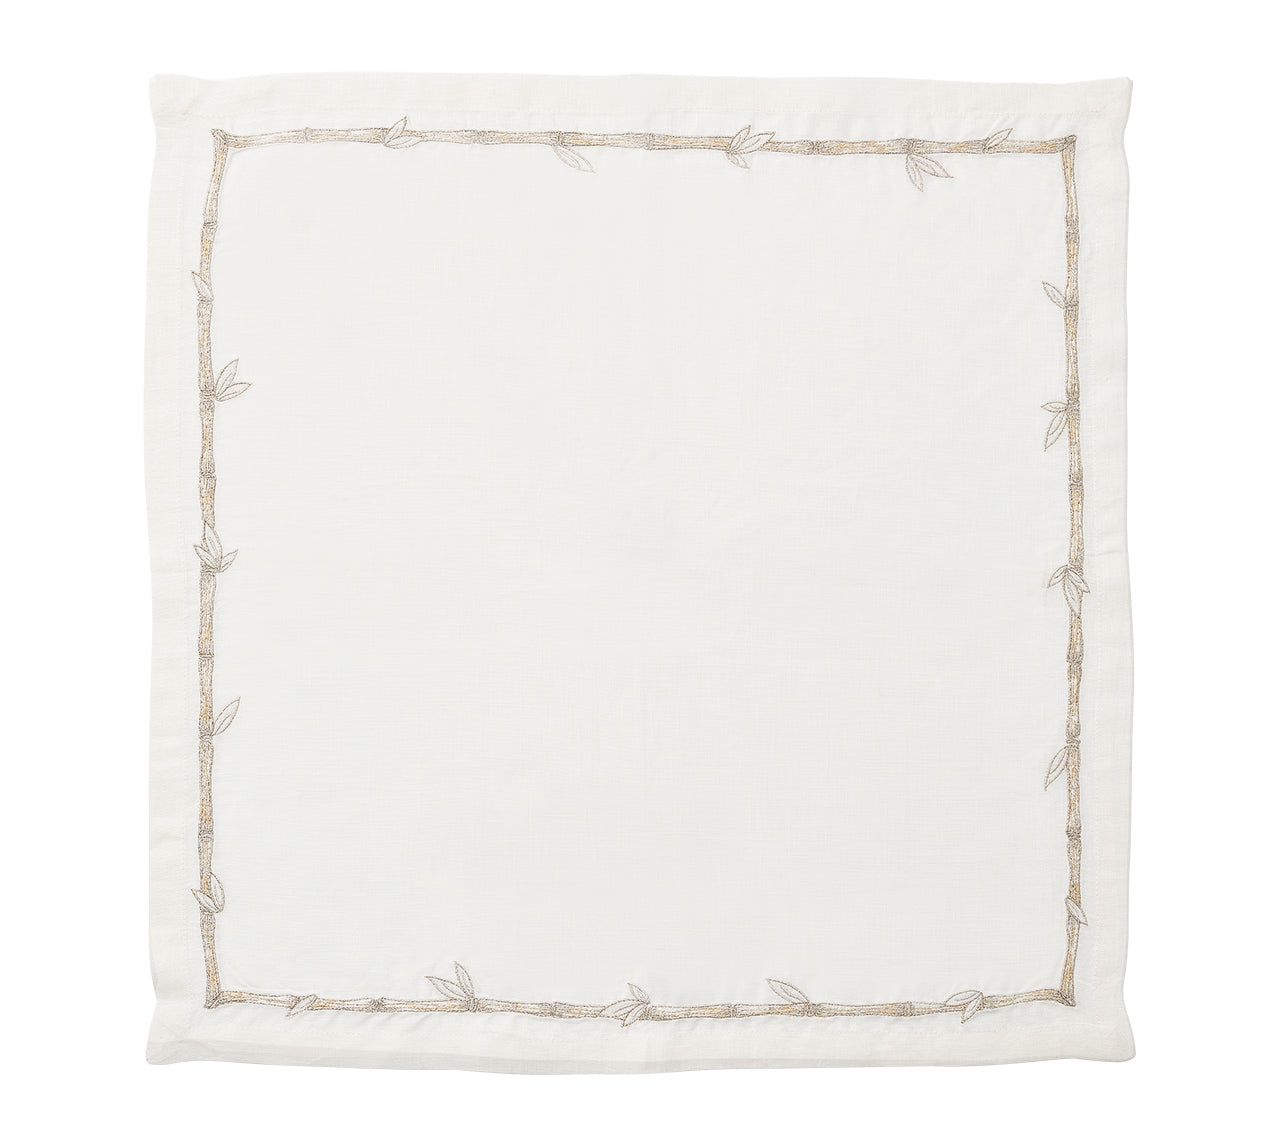 White Bamboo Napkin with a gold & silver border, unfolded